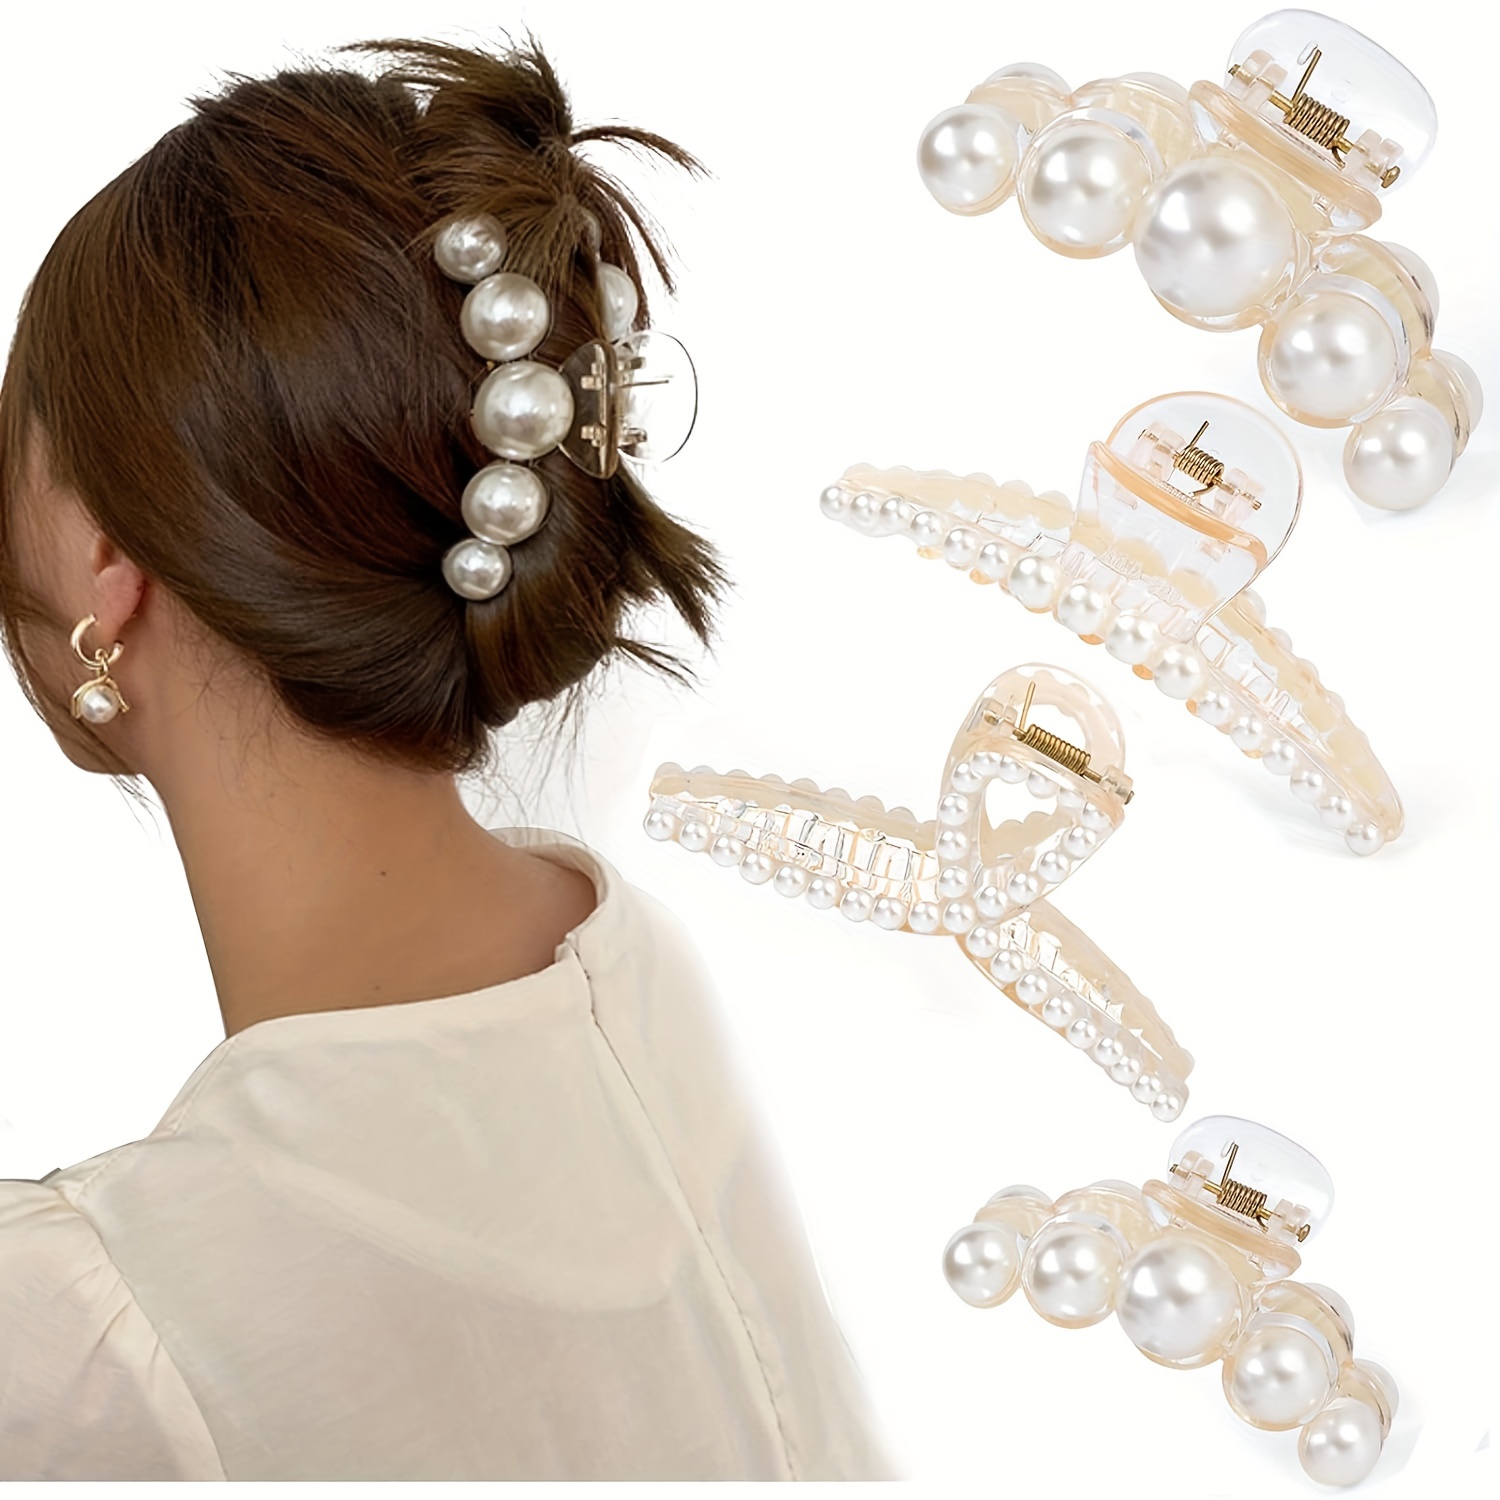 

4 Pcs Faux Pearl Hair Claw Clips For Women, Hair Barrette Clamps For Thick Thin Hair, Fashion Hair Accessories Headwear Styling Tools For Party Wedding